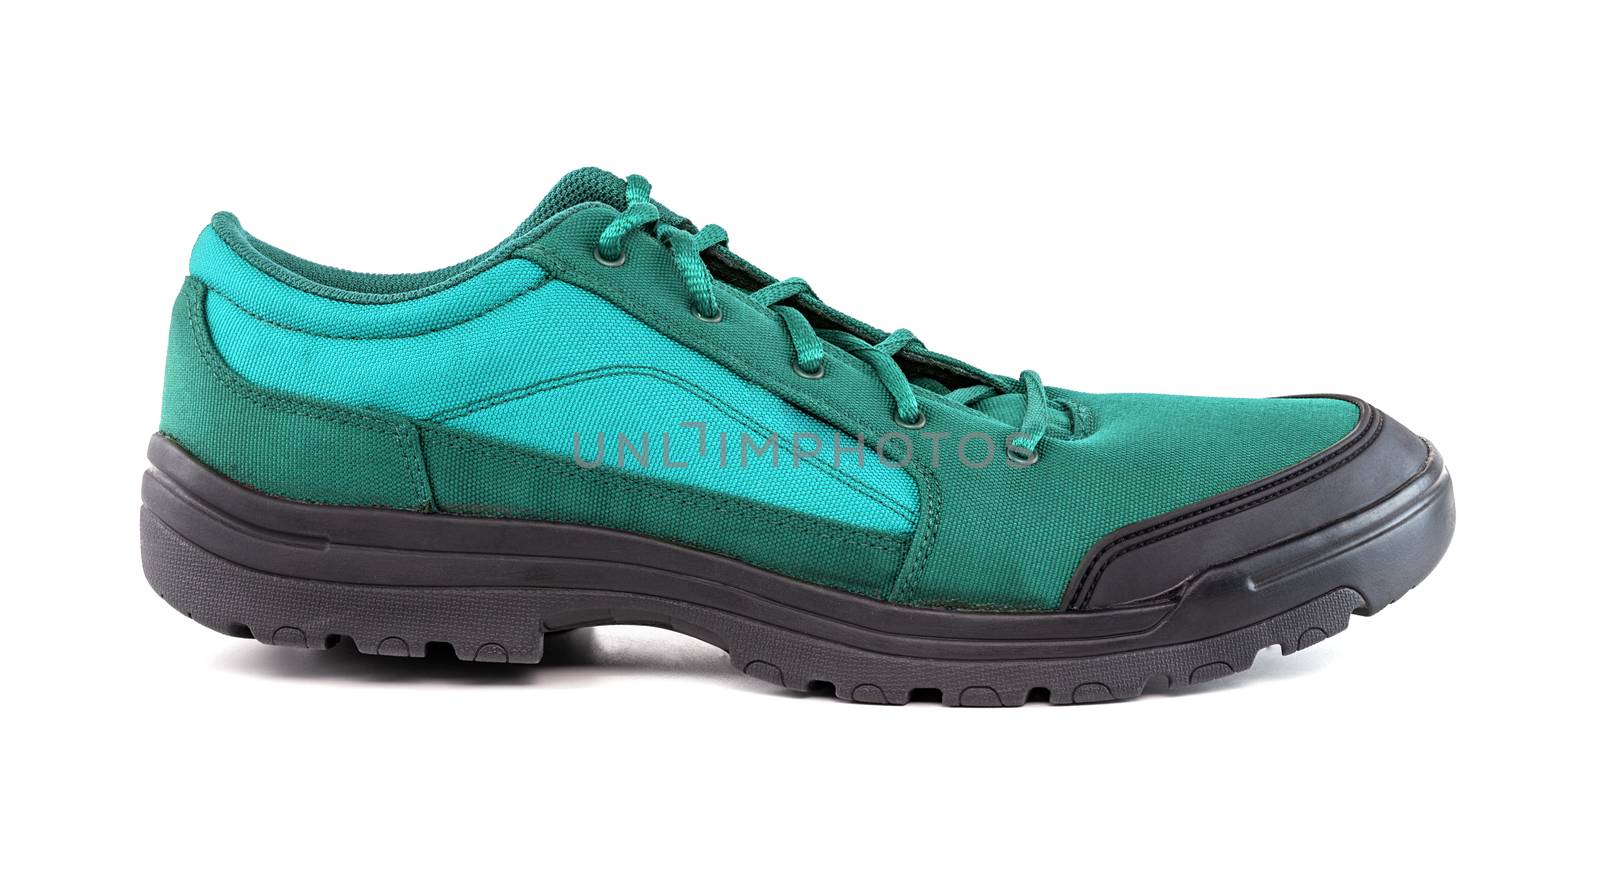 right cheap aqua mint turquoise green hiking or hunting shoe isolated on white background - side view.